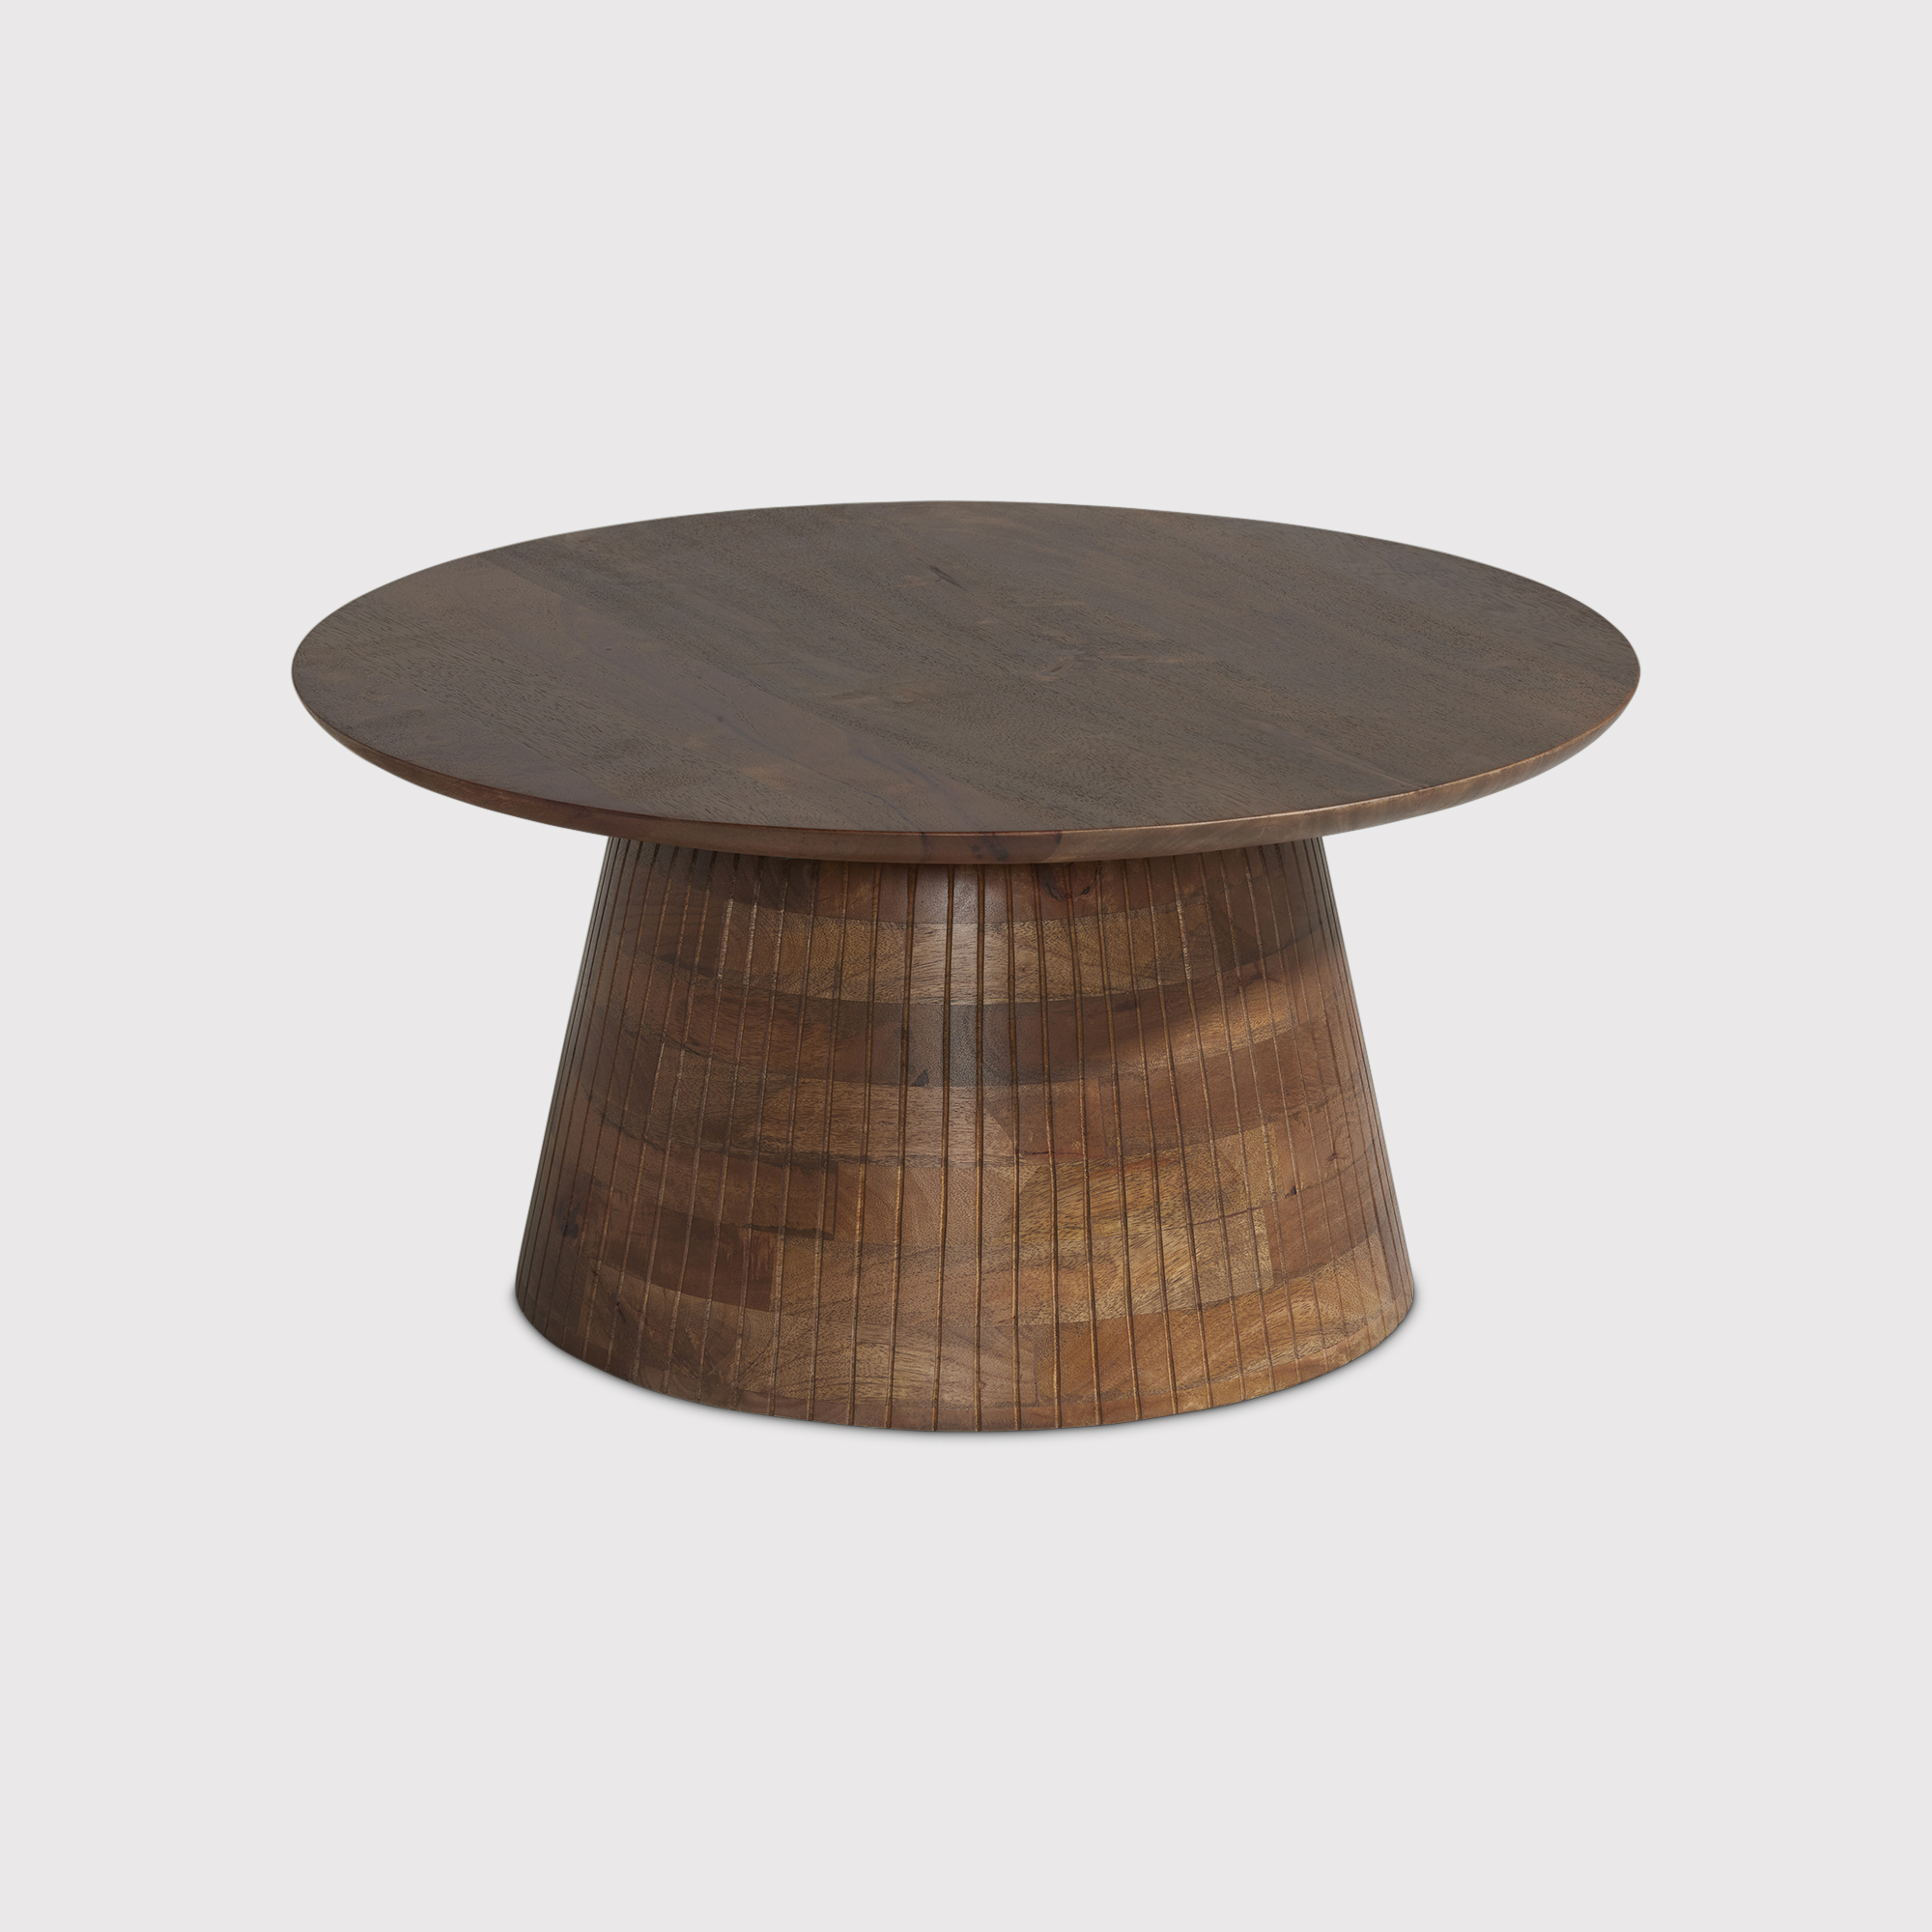 Ackley Coffee Table 70cm, Round, Brown | Barker & Stonehouse